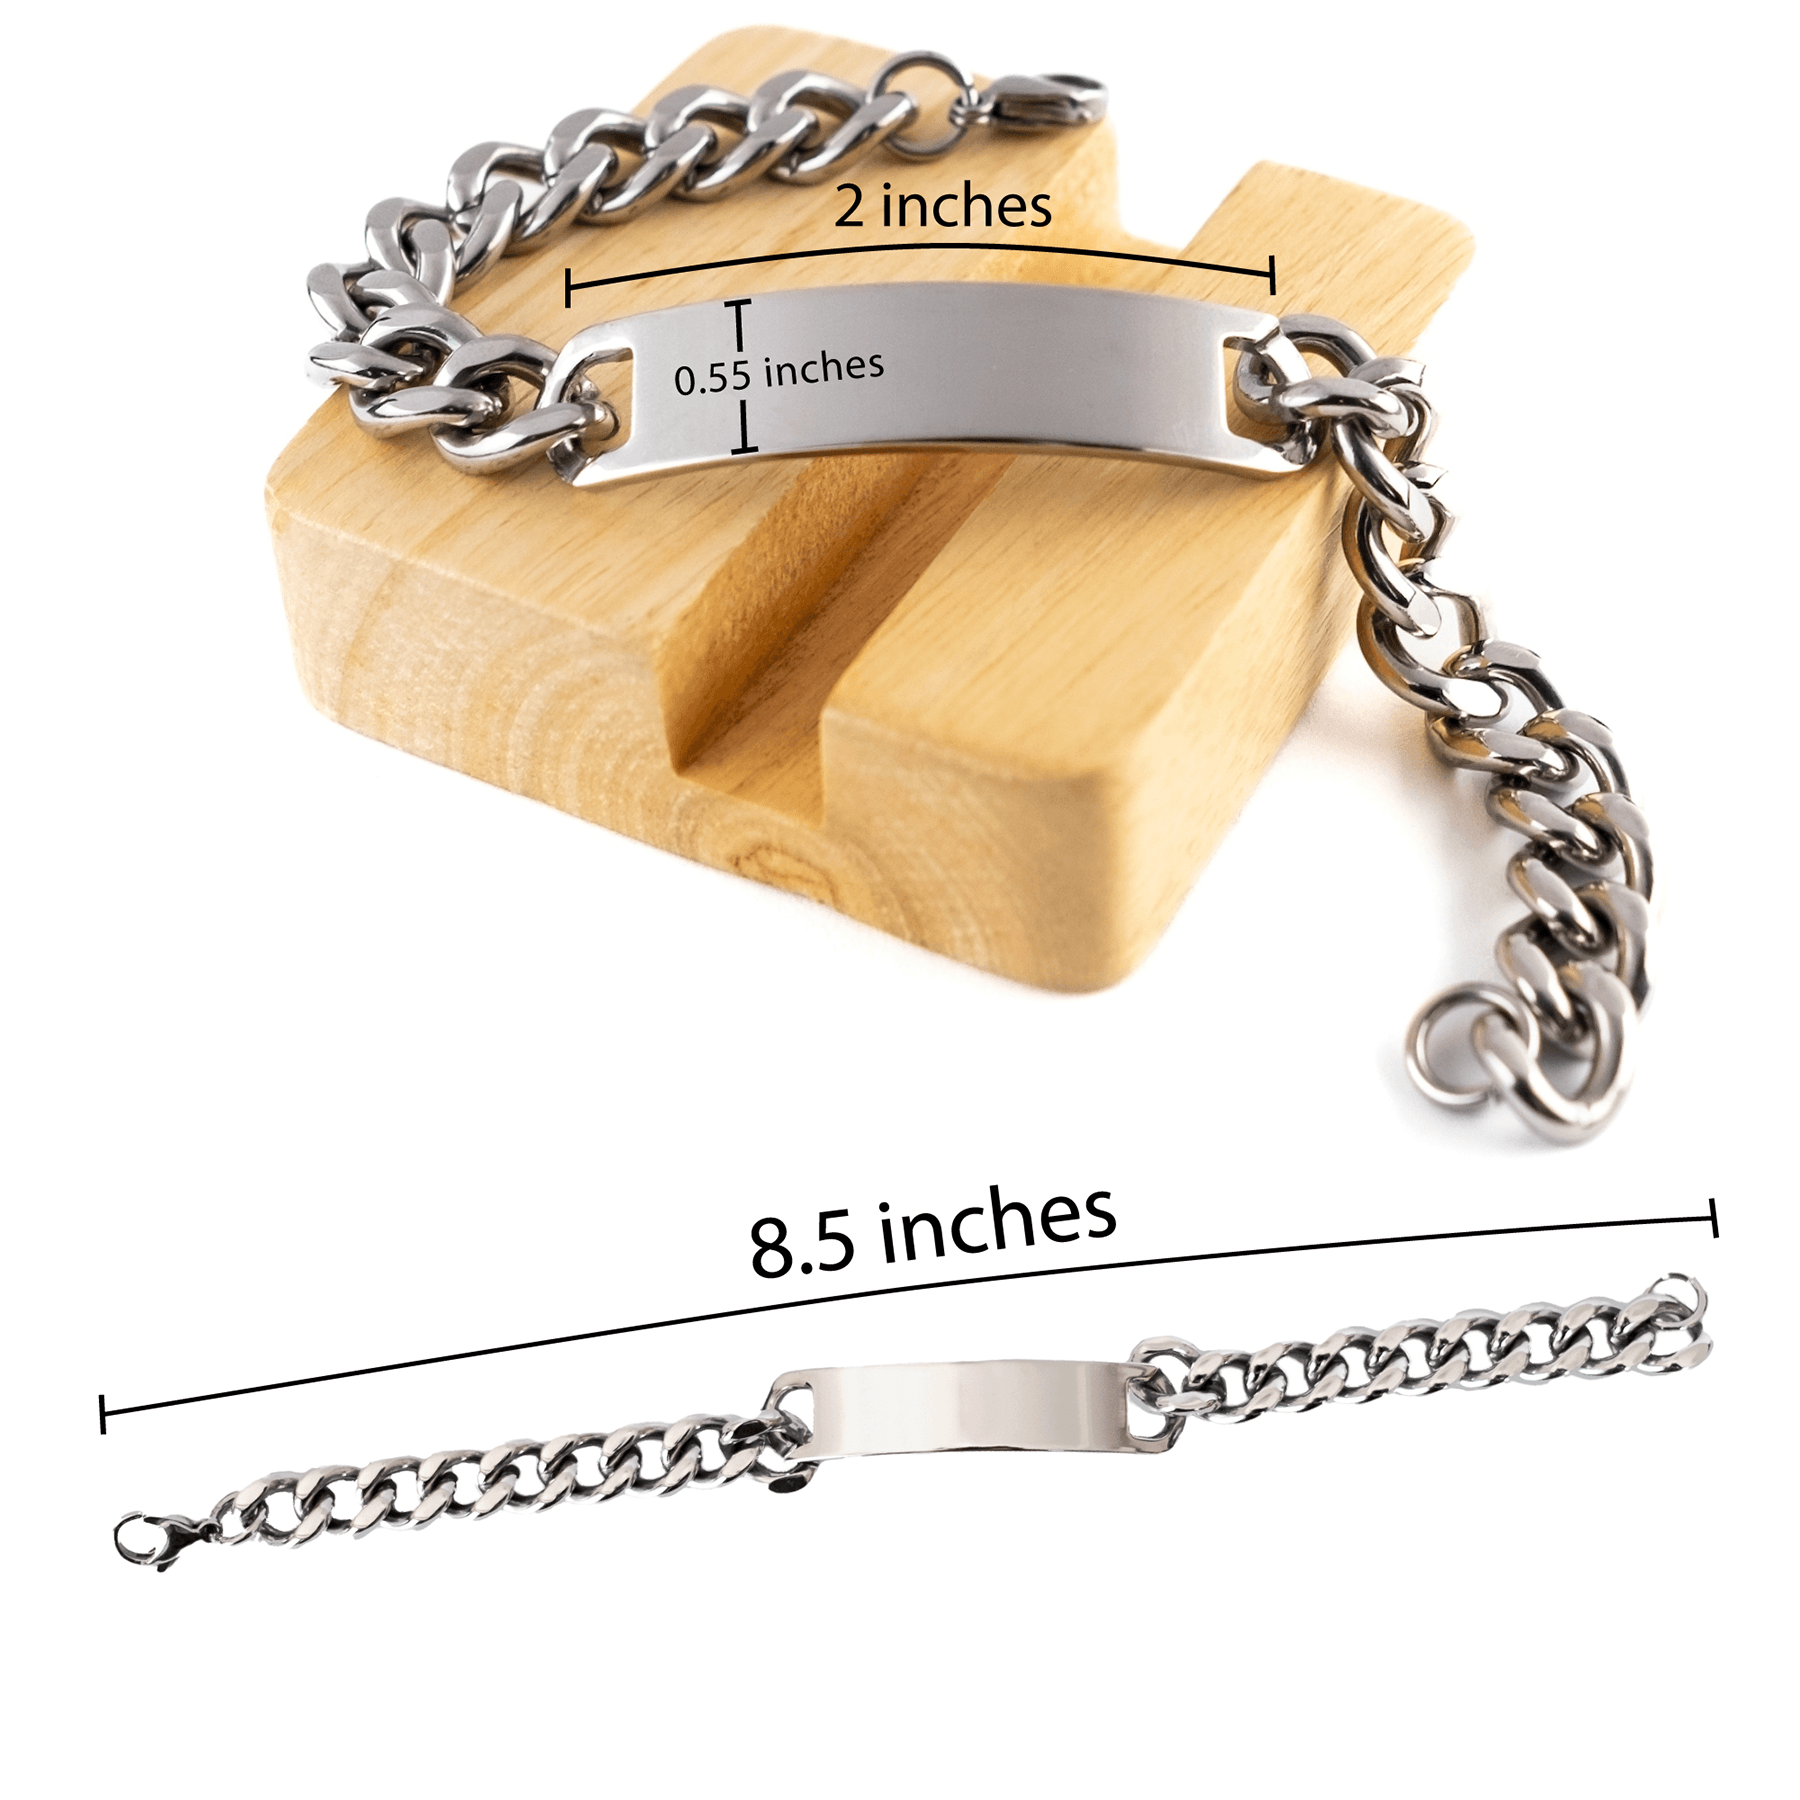 Remarkable Marketing Manager Gifts, Your dedication and hard work, Inspirational Birthday Christmas Unique Cuban Chain Stainless Steel Bracelet For Marketing Manager, Coworkers, Men, Women, Friends - Mallard Moon Gift Shop